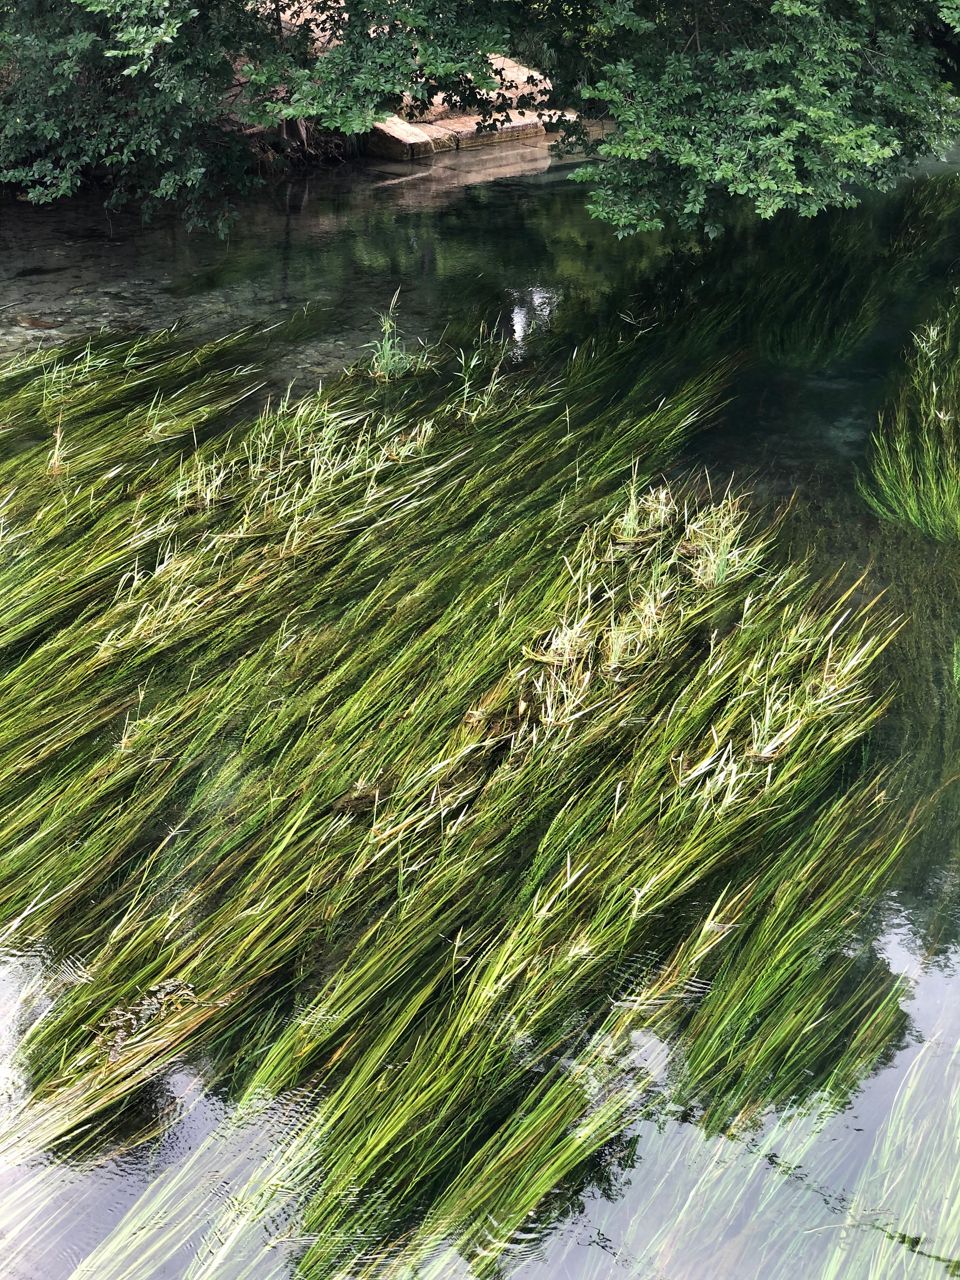 Texas wild rice floating in harmony with the water. (Charlotte Scott/Spectrum News 1)